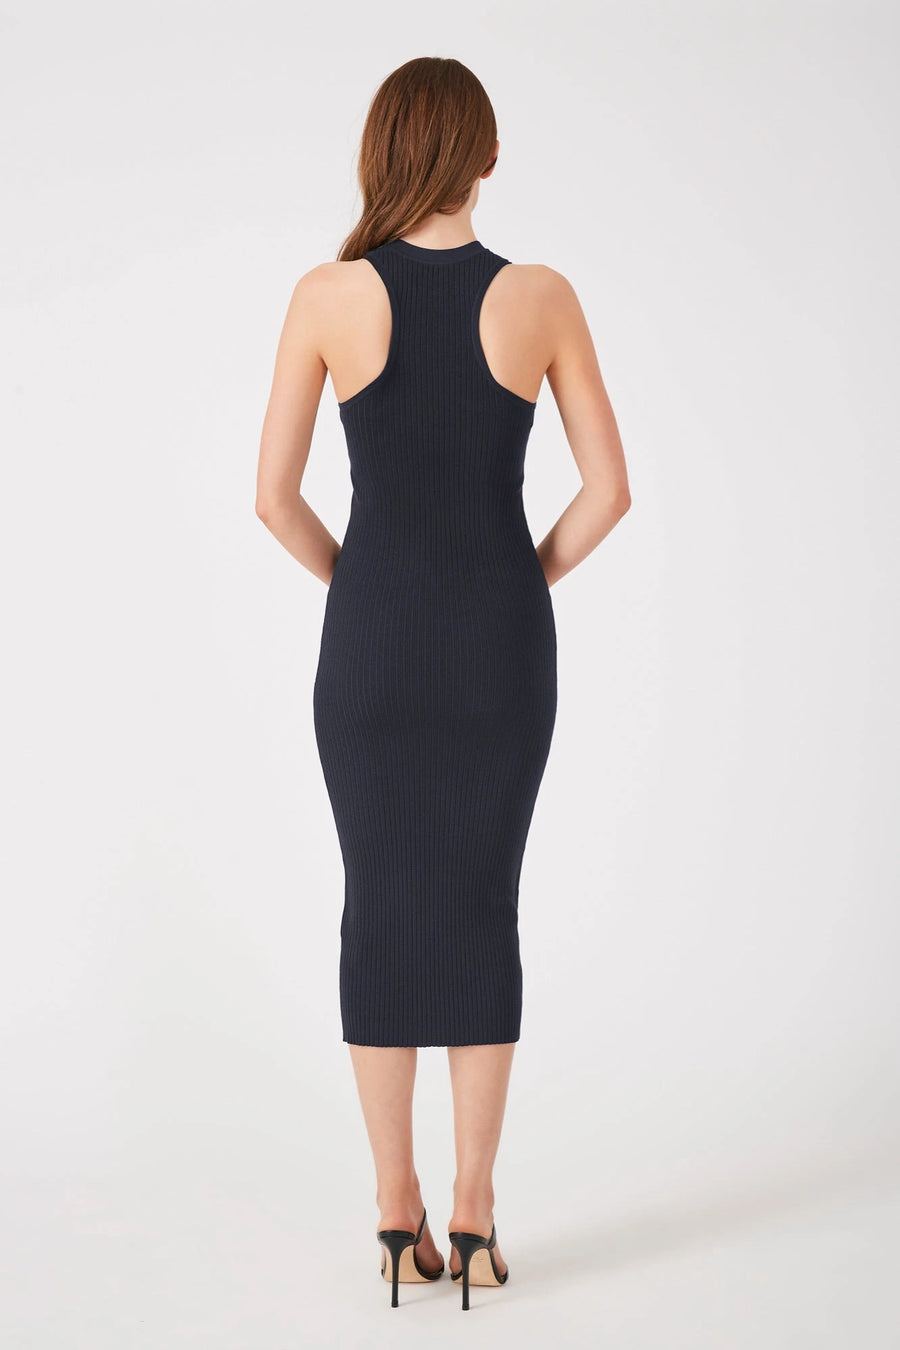 The Gisele tank dress in navy by Greyven